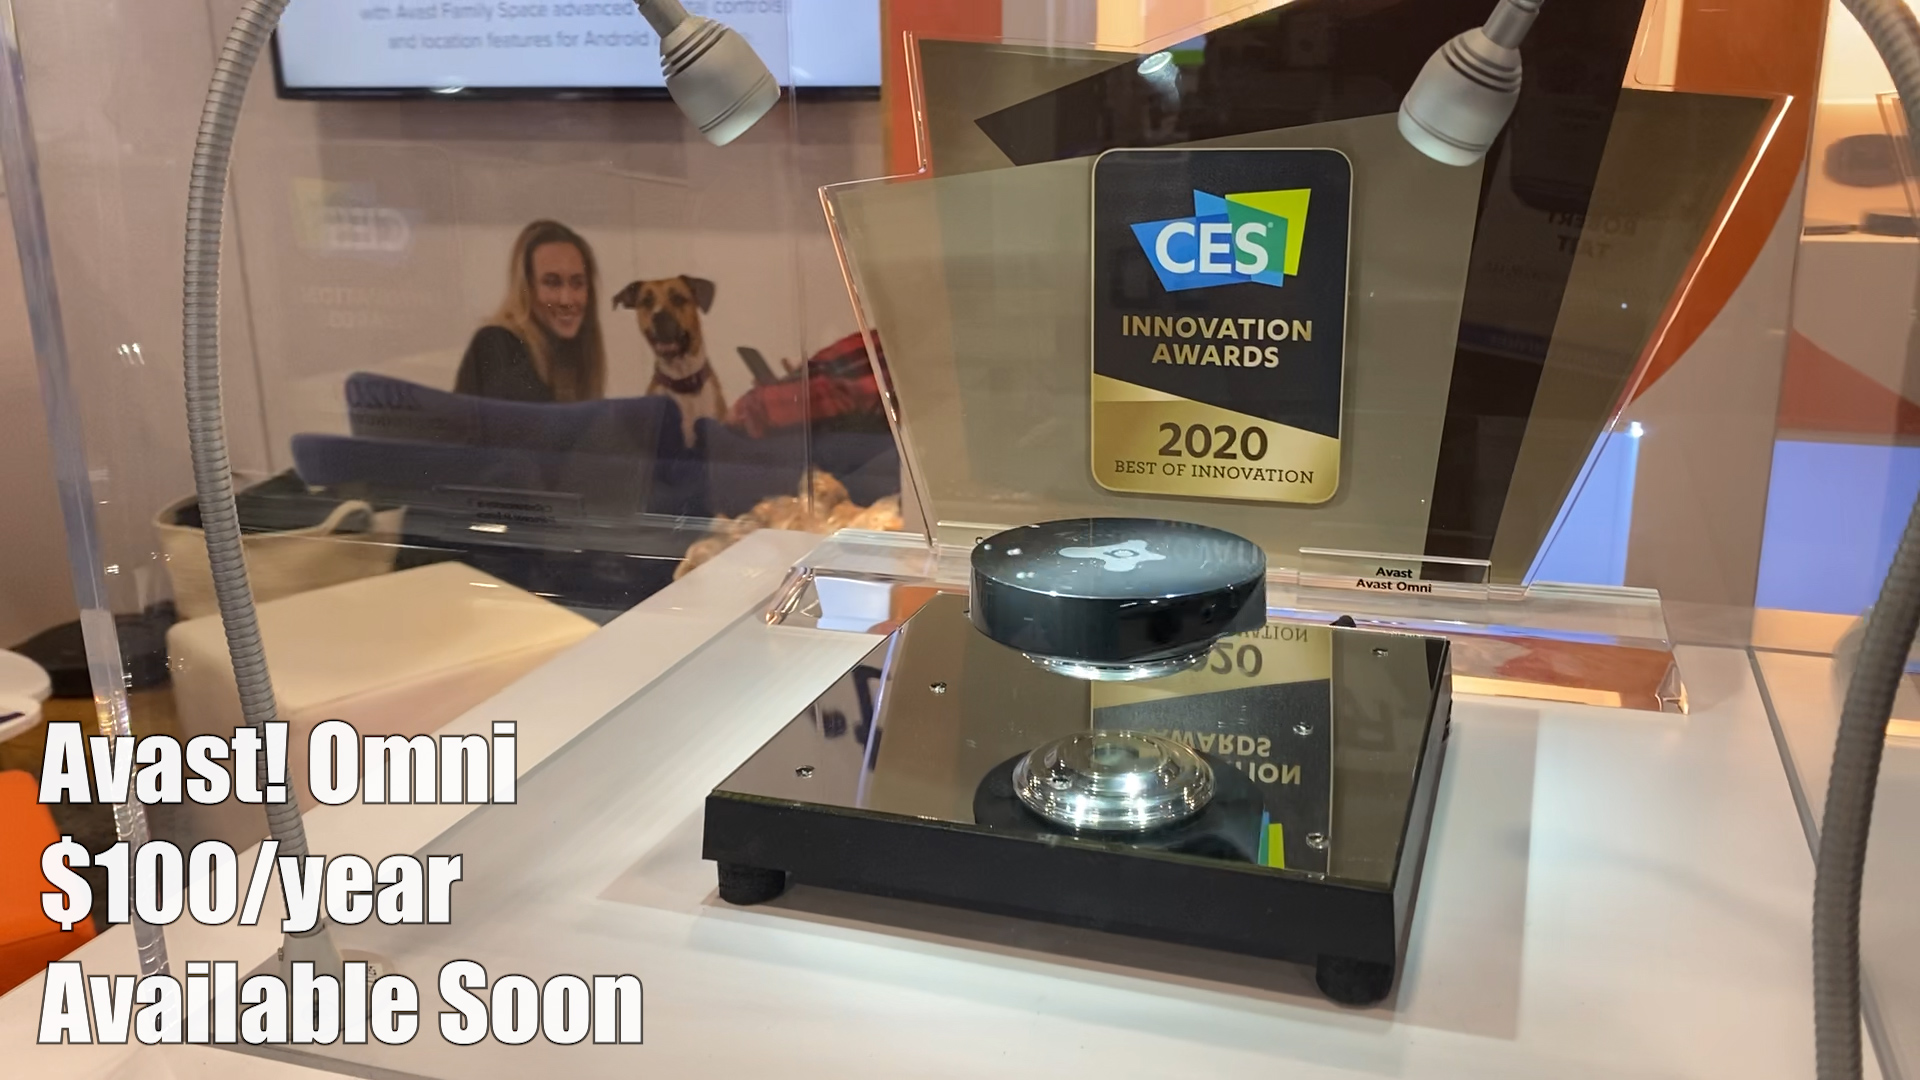 5 Cool New Smart Home Gadgets from CES 2020